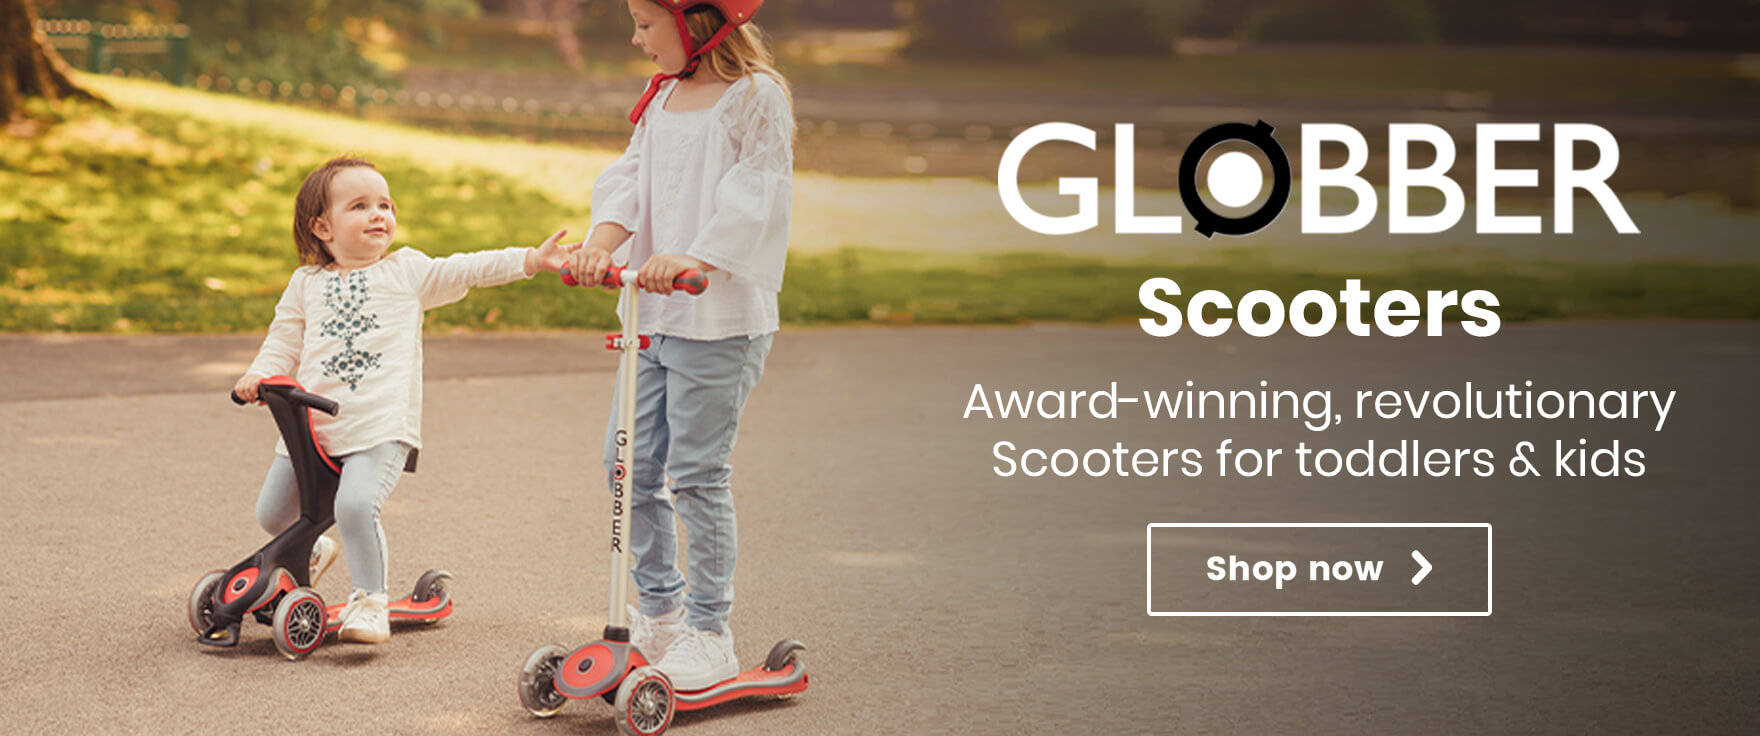 Globber Scooters Award-winning, revolutionary scooters for toddlers & kids